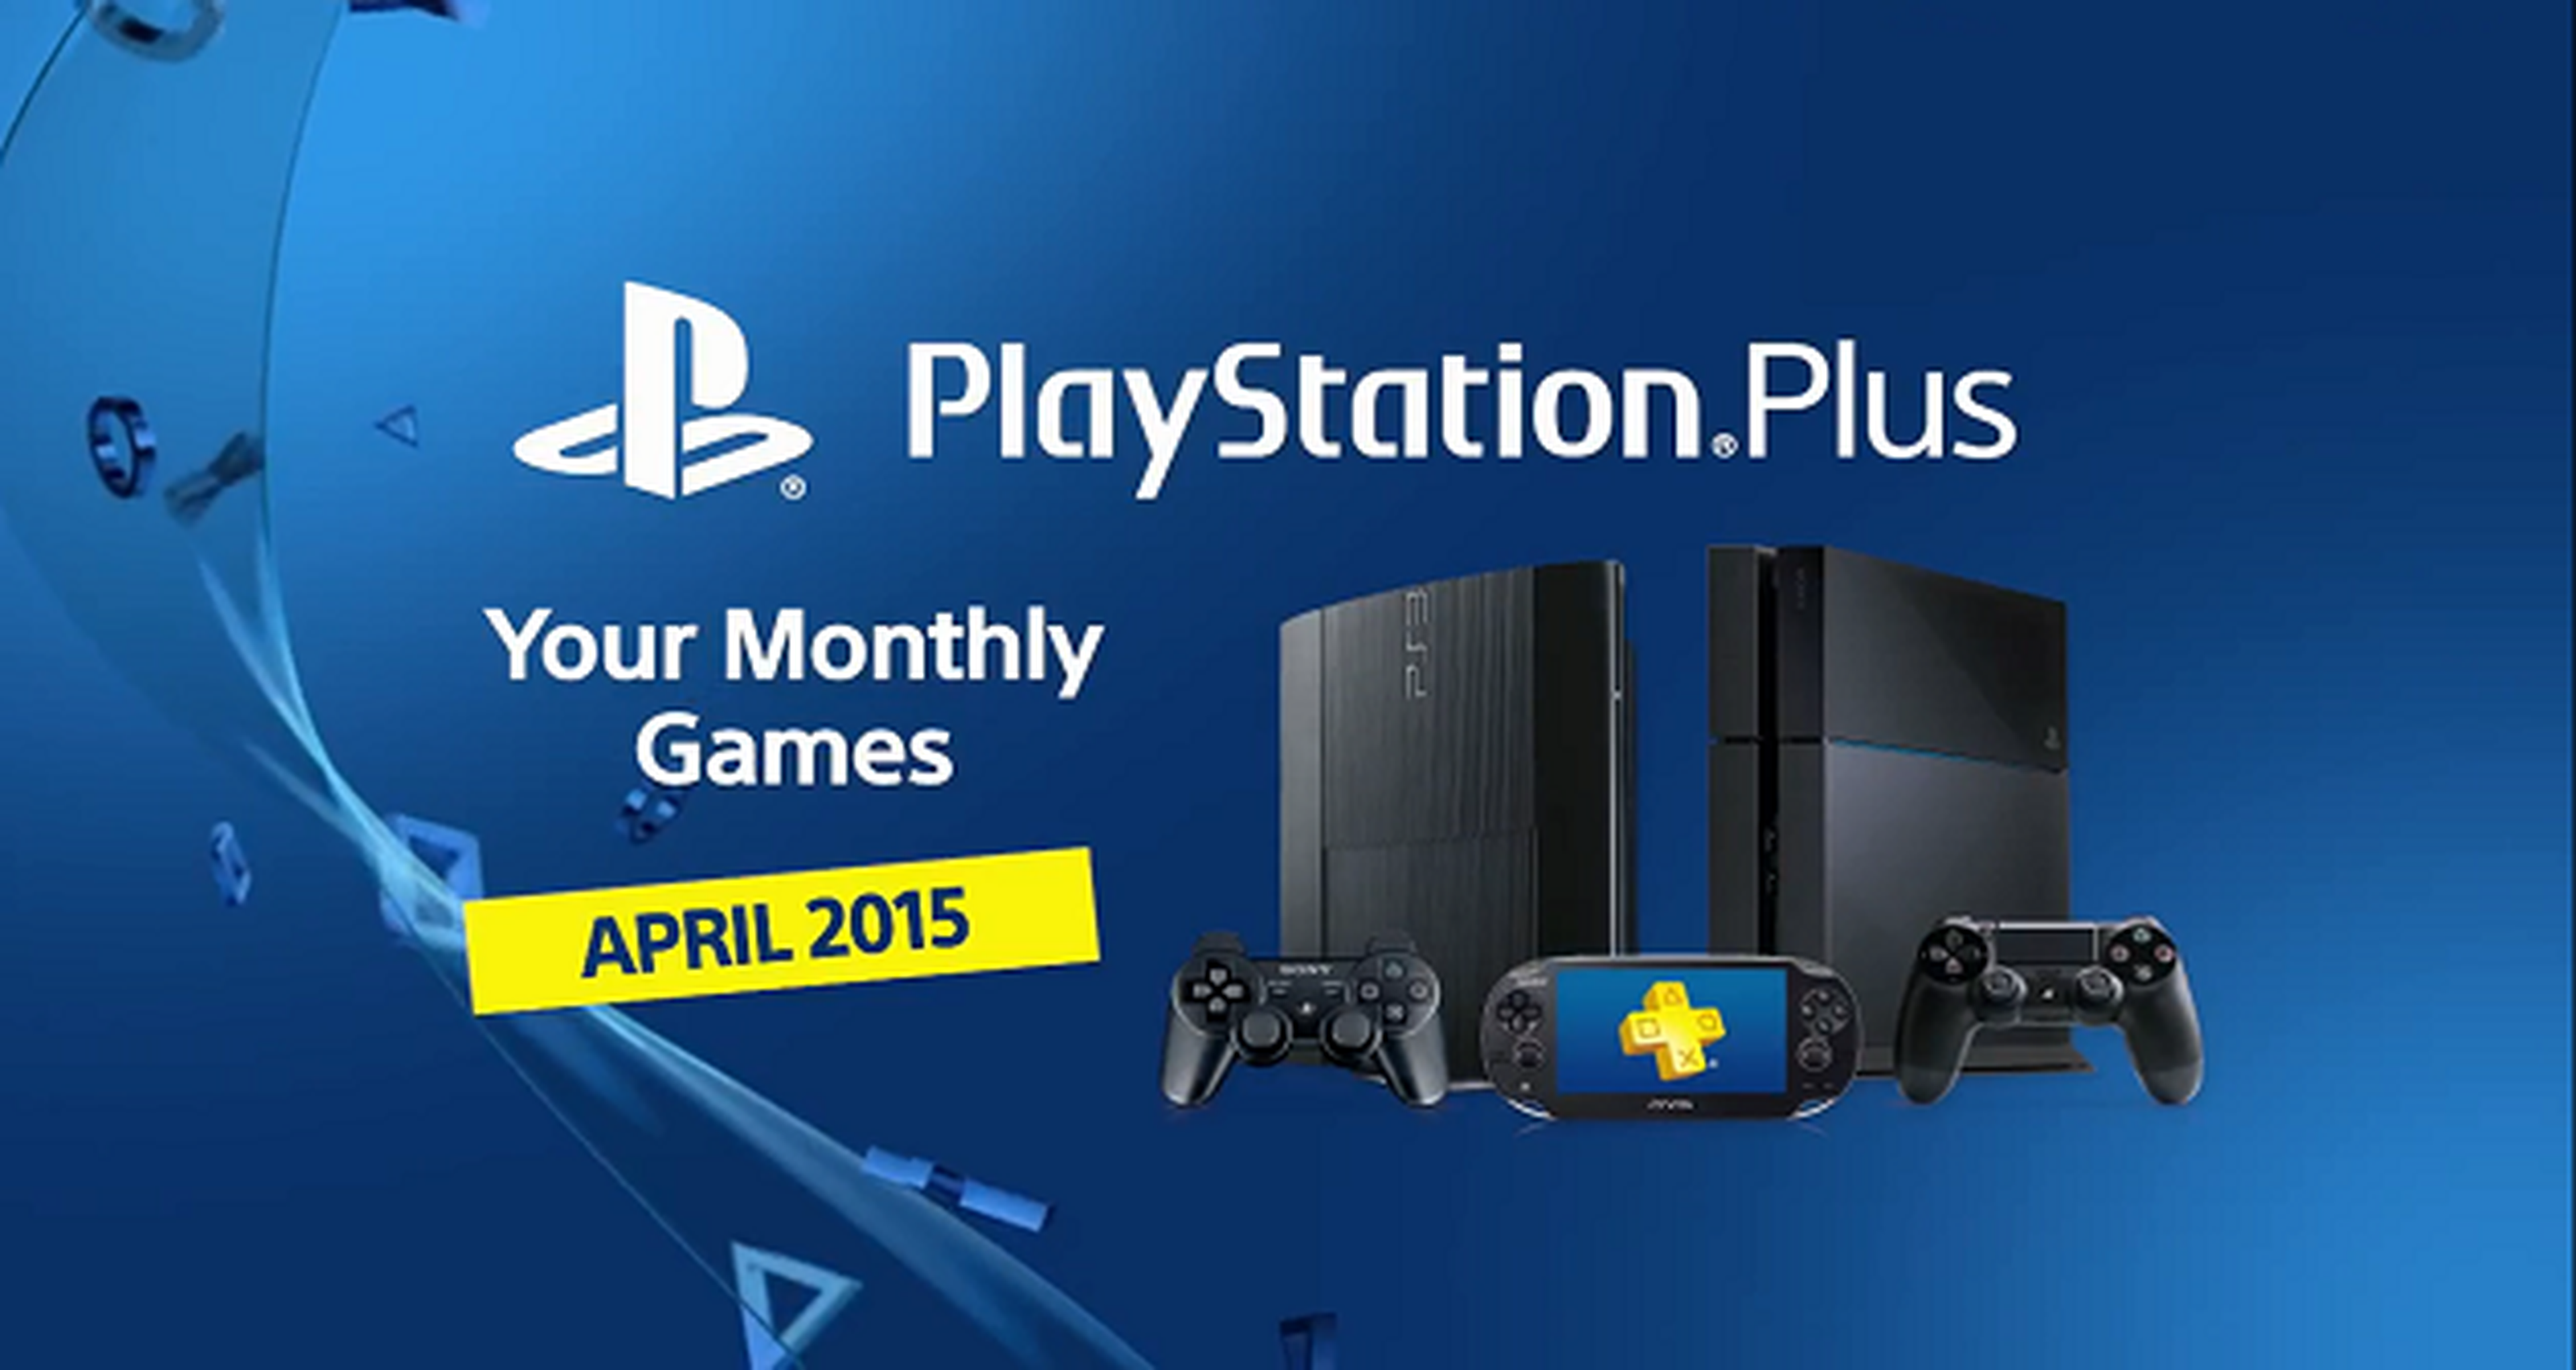 PlayStation Plus _ Your monthly games for April 2015